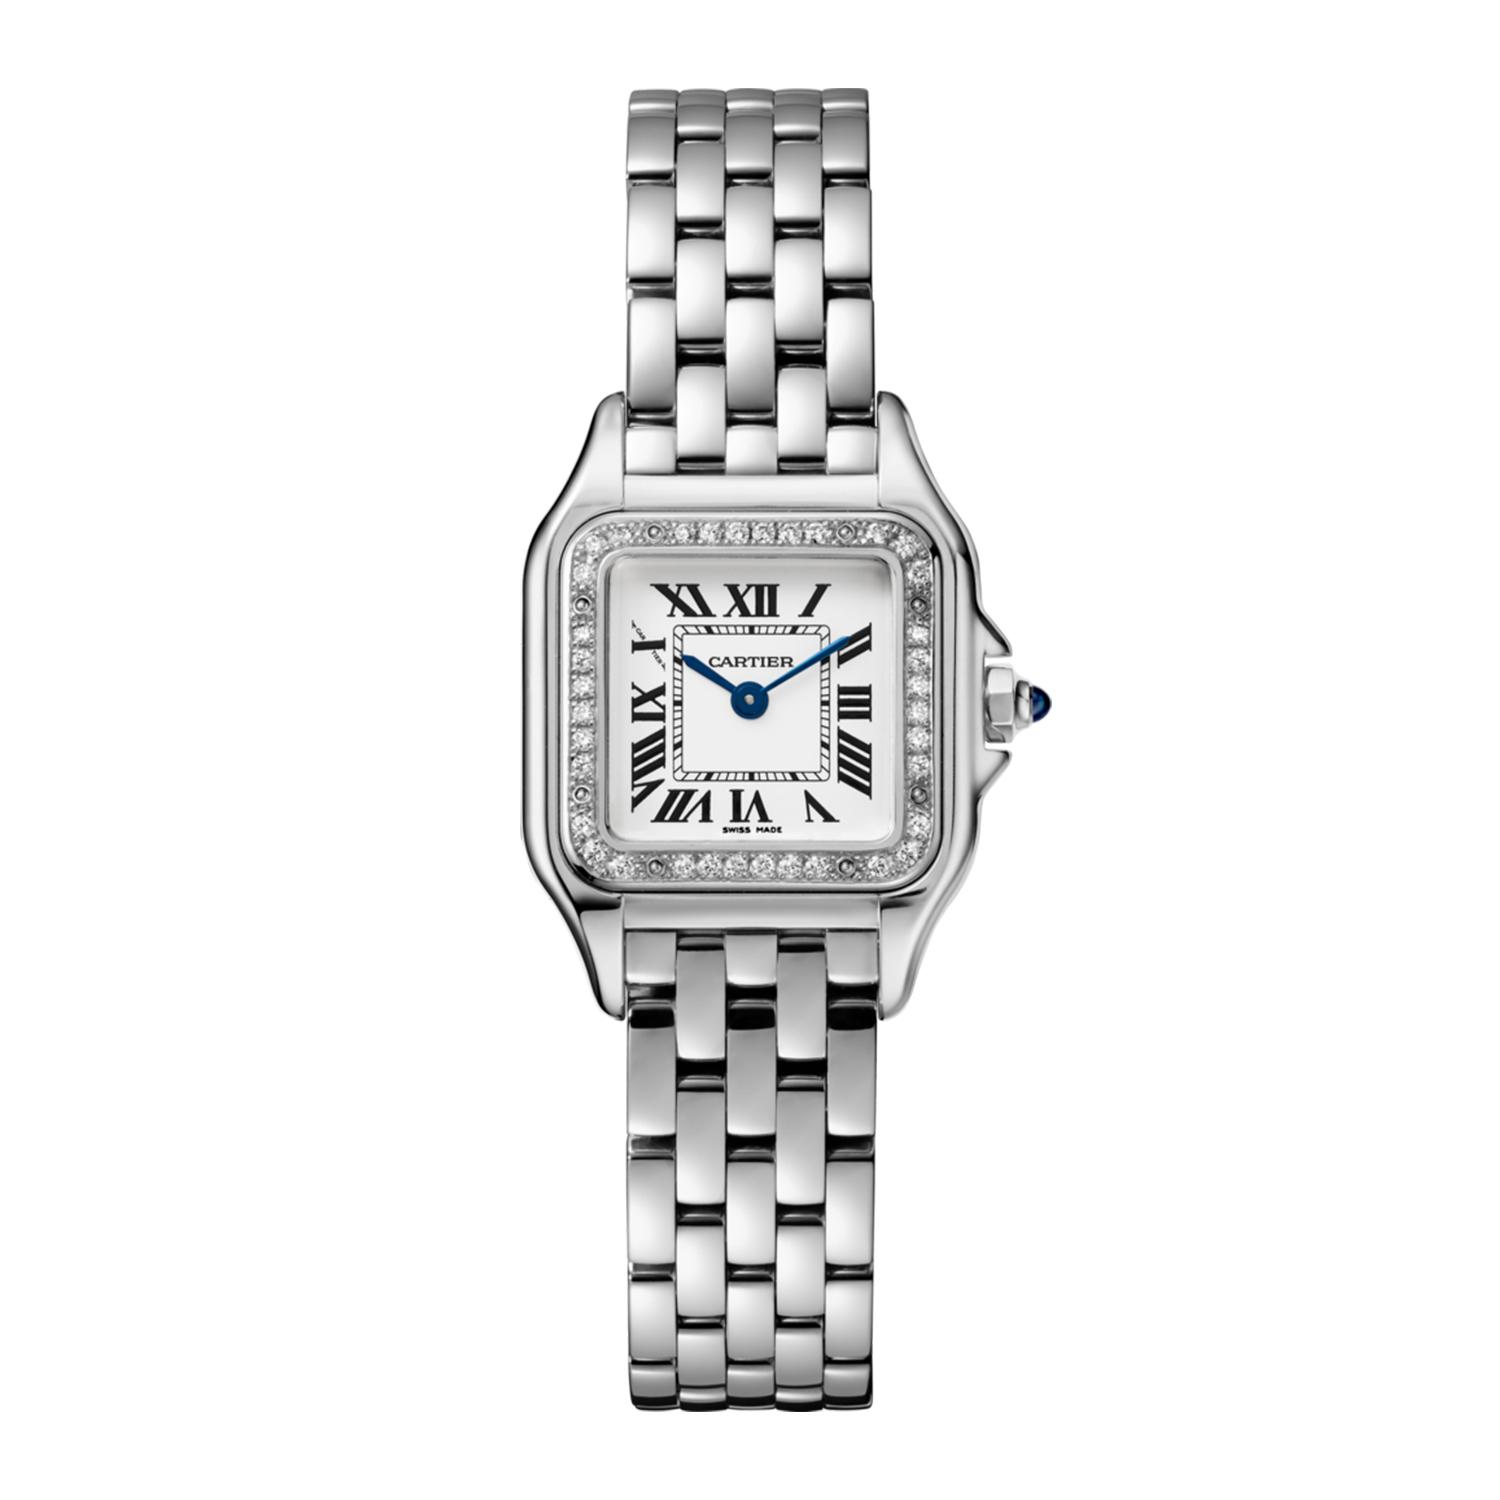 Panthere De Cartier Watch with Diamond Case, small model